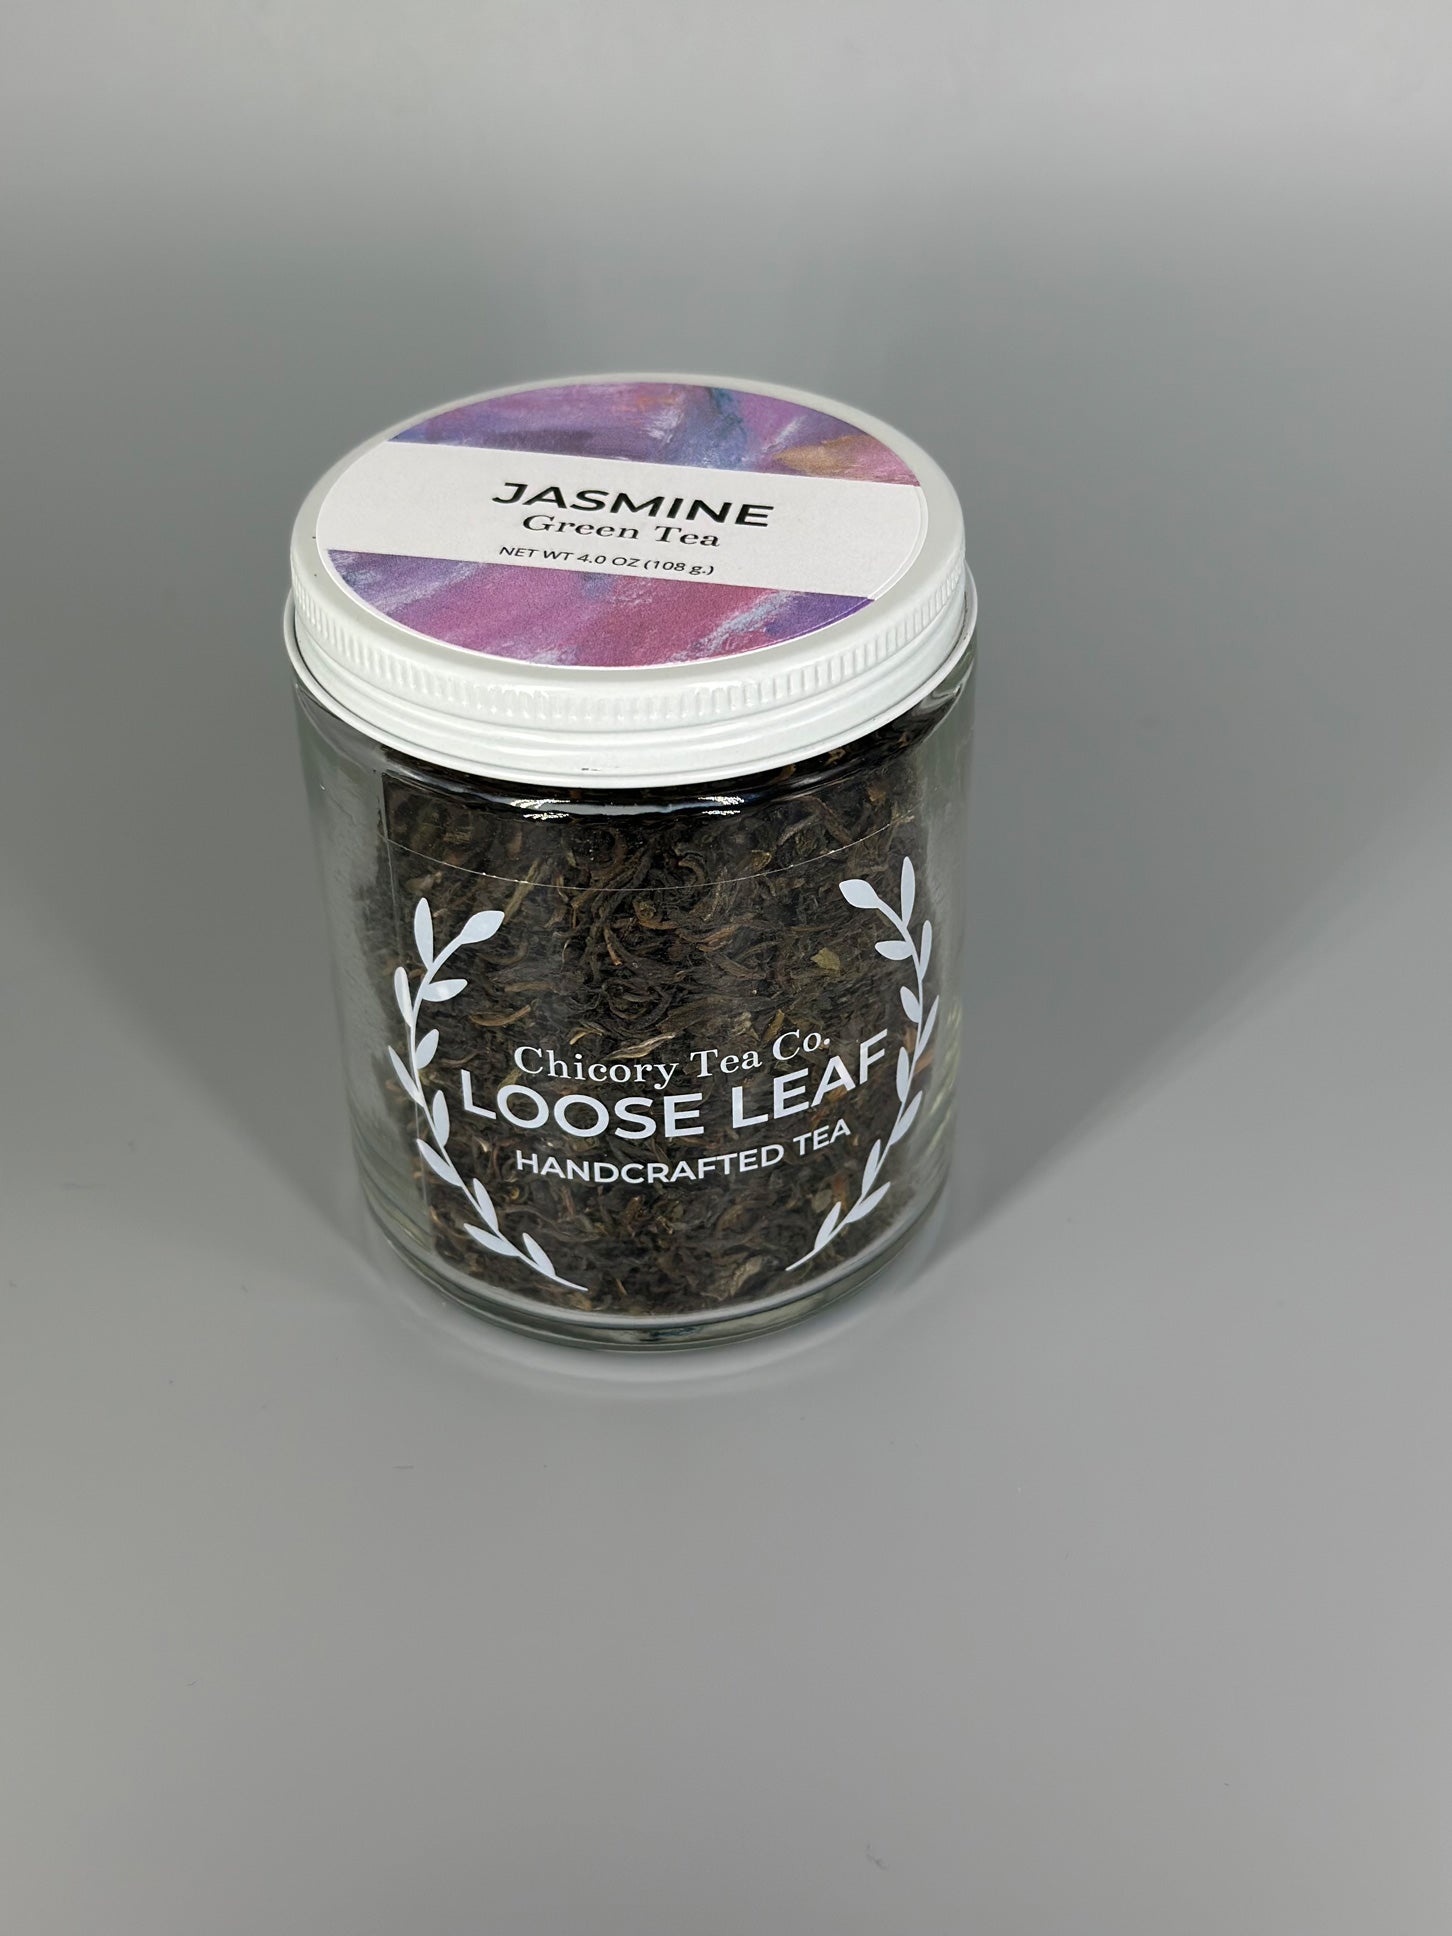 Chicory Tea Co.'s Jasmine Green Tea in the jar, from the front